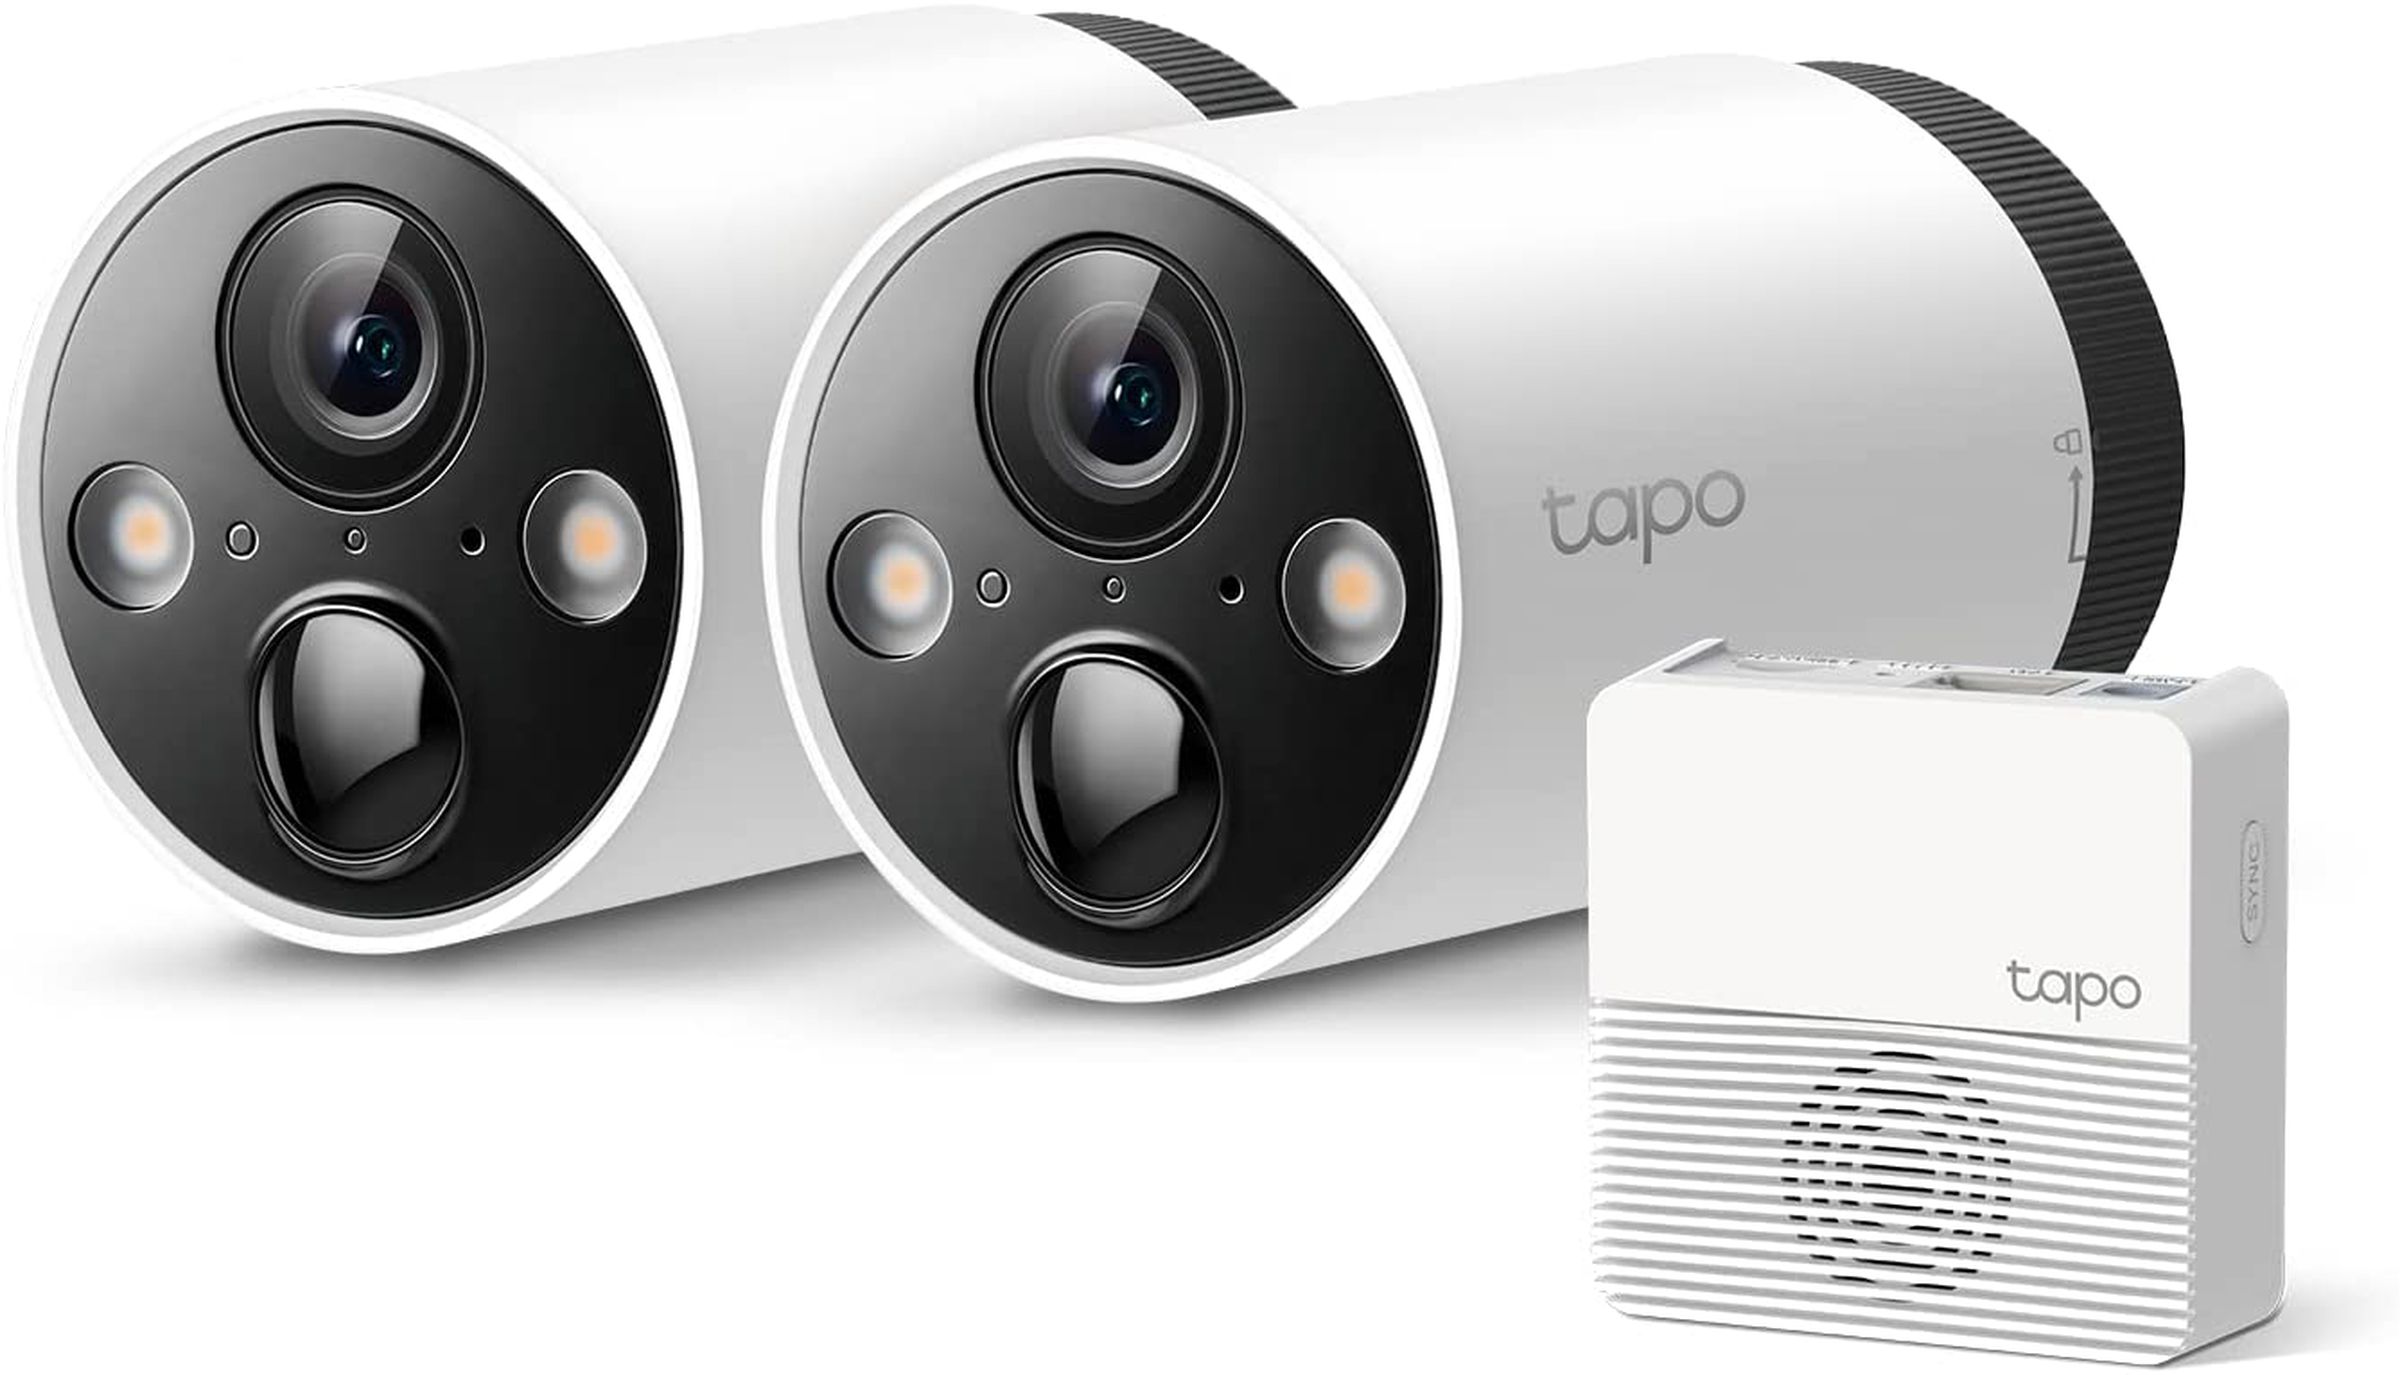 The Tapo camera hub needs to be connected to Ethernet and has a micro-SD card for local storage.